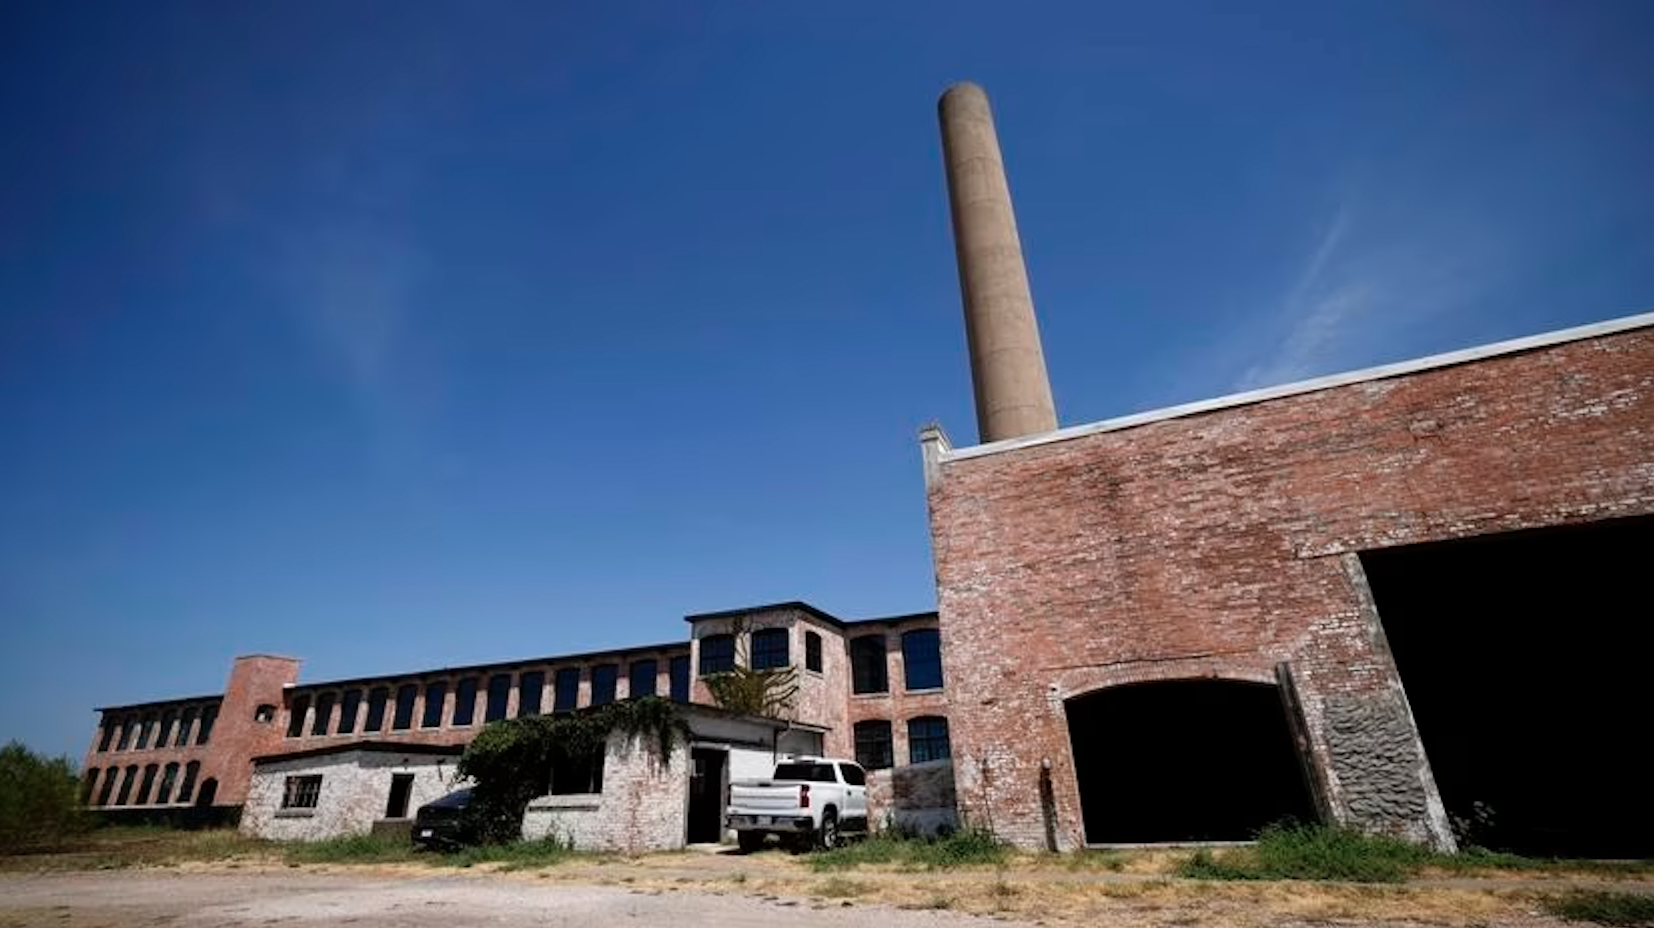 [DMRE Deal] McKinney’s Historic Cotton Mill will be Site of Seven-Story, Multifamily Units